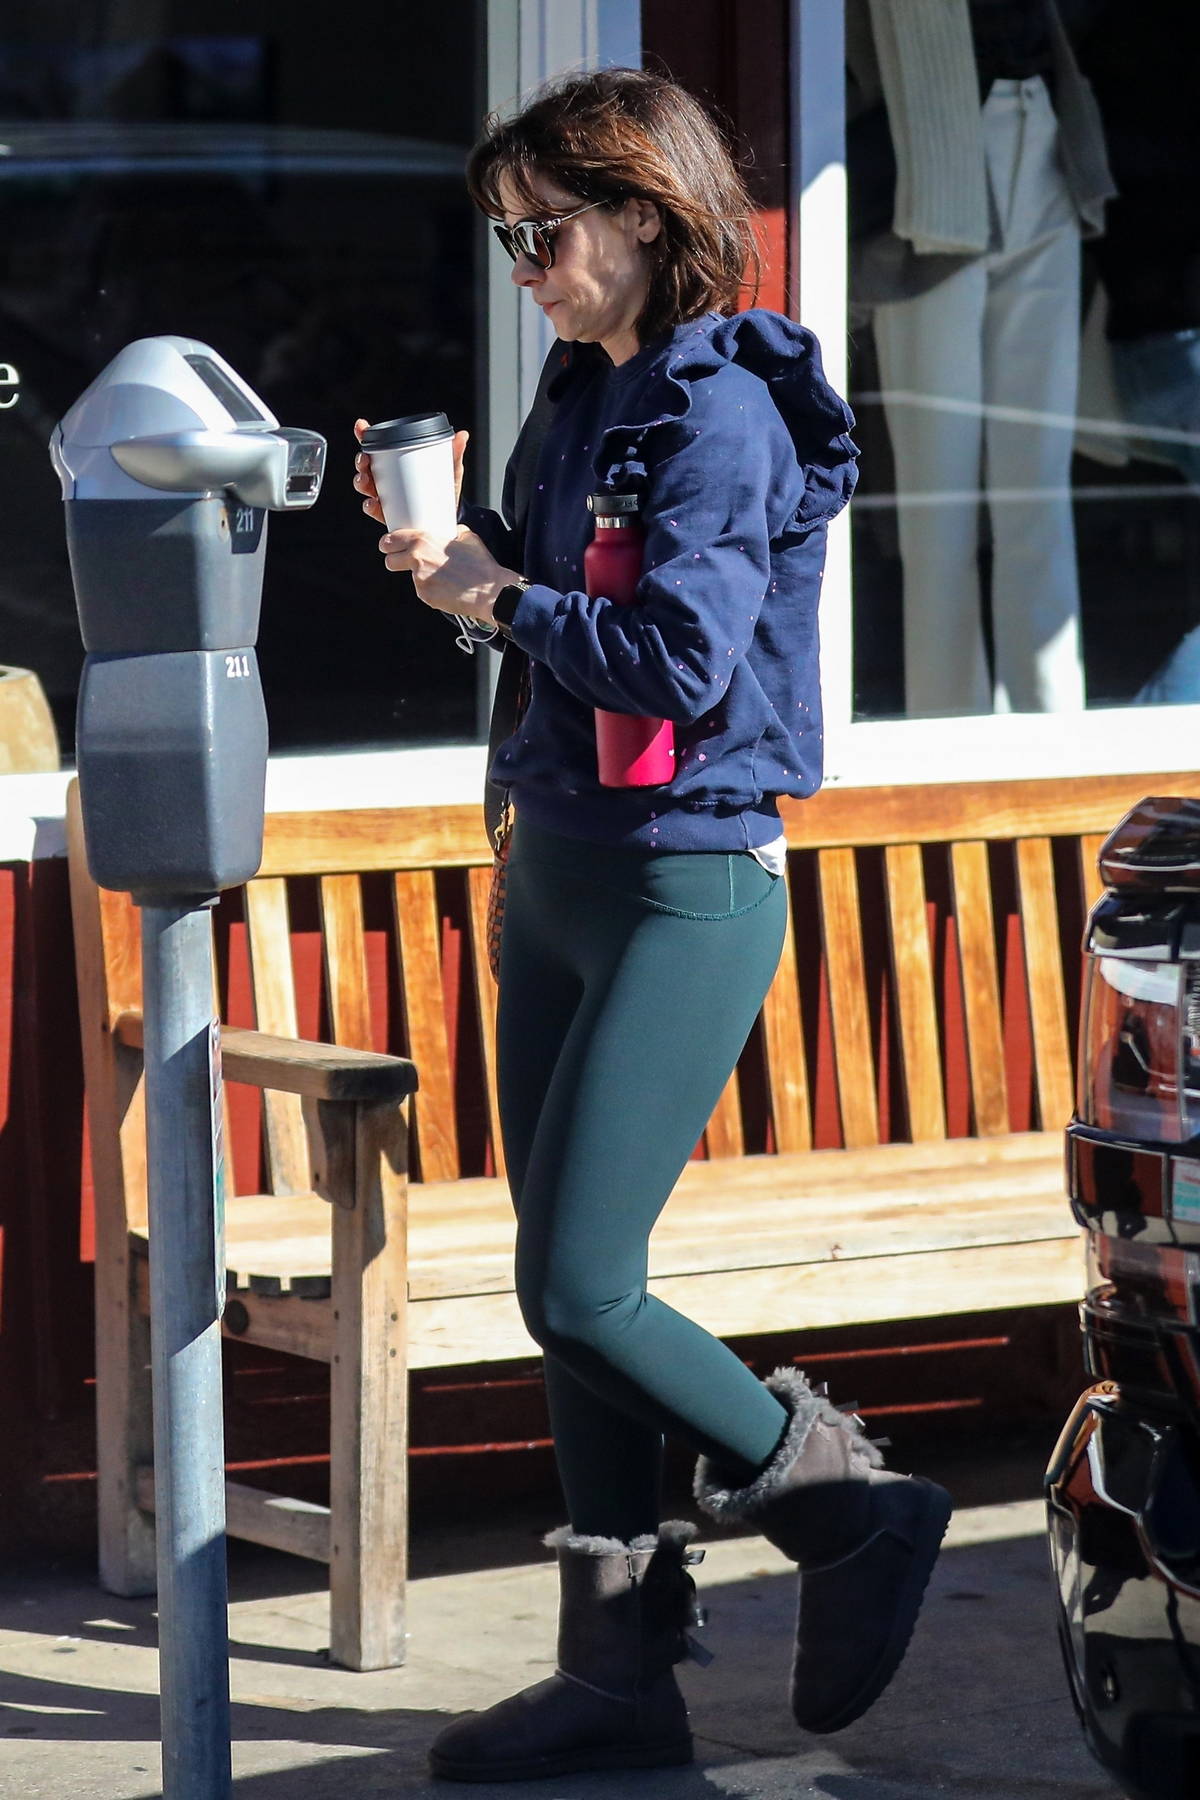 https://www.celebsfirst.com/wp-content/uploads/2022/11/zooey-deschanel-stays-cozy-in-a-blue-sweater-leggings-and-uggs-while-out-for-her-workout-in-brentwood-california-241122_10.jpg